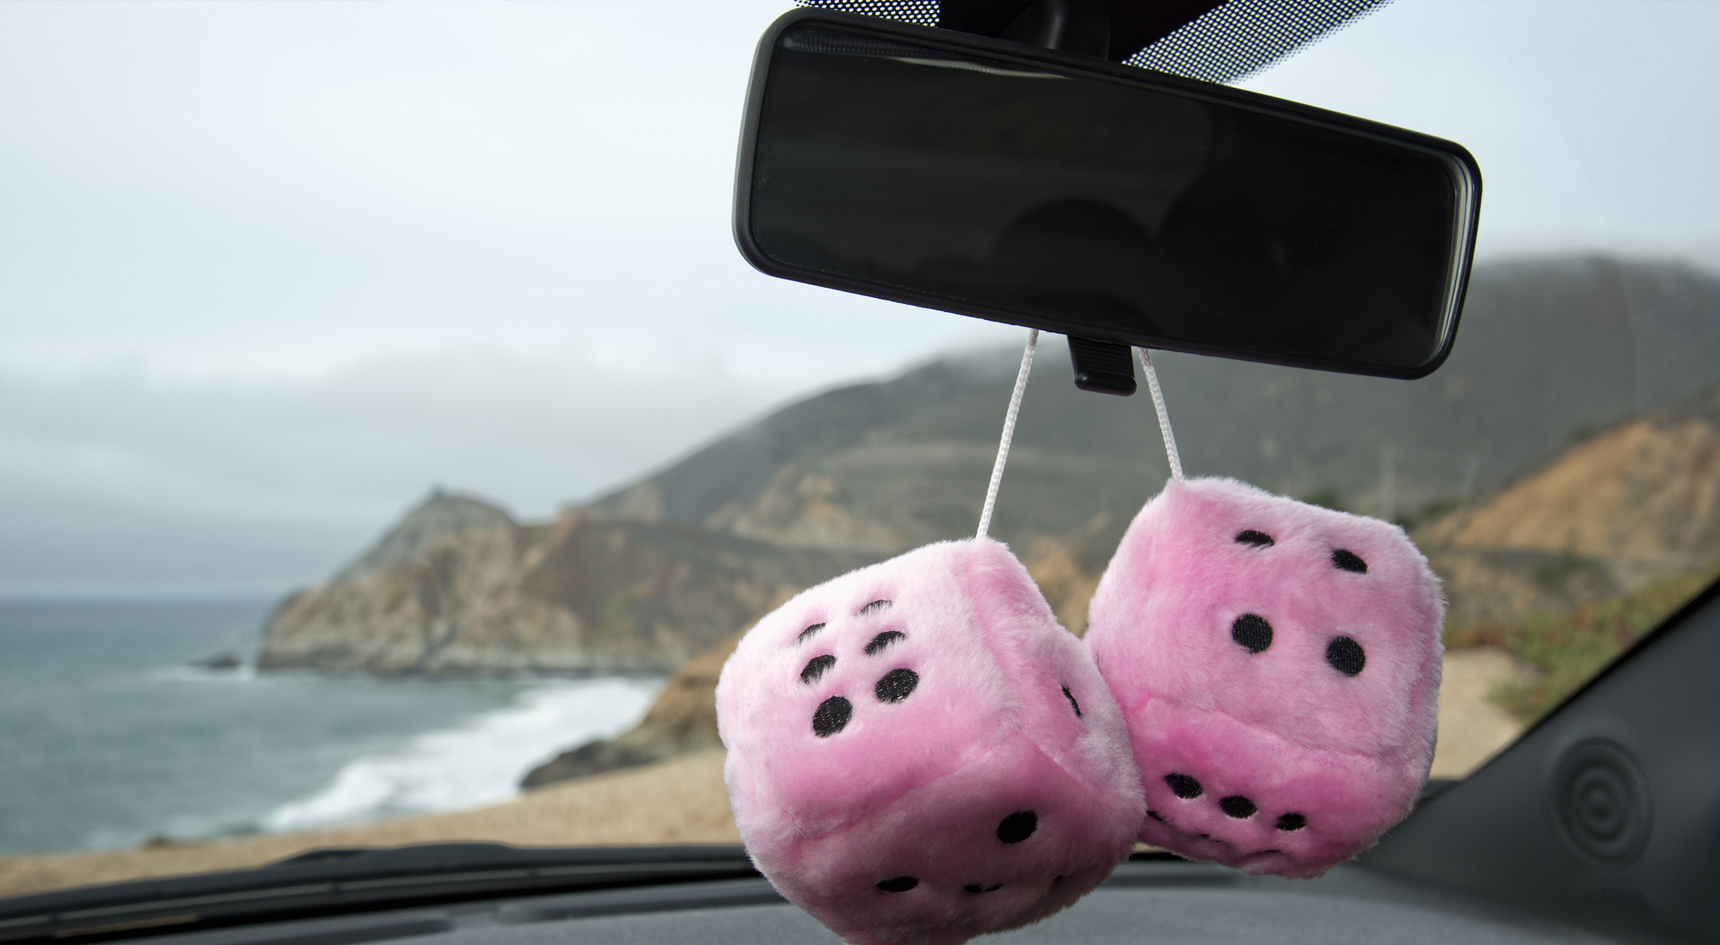 Fluffy dice hanging from the rear-vision mirror.